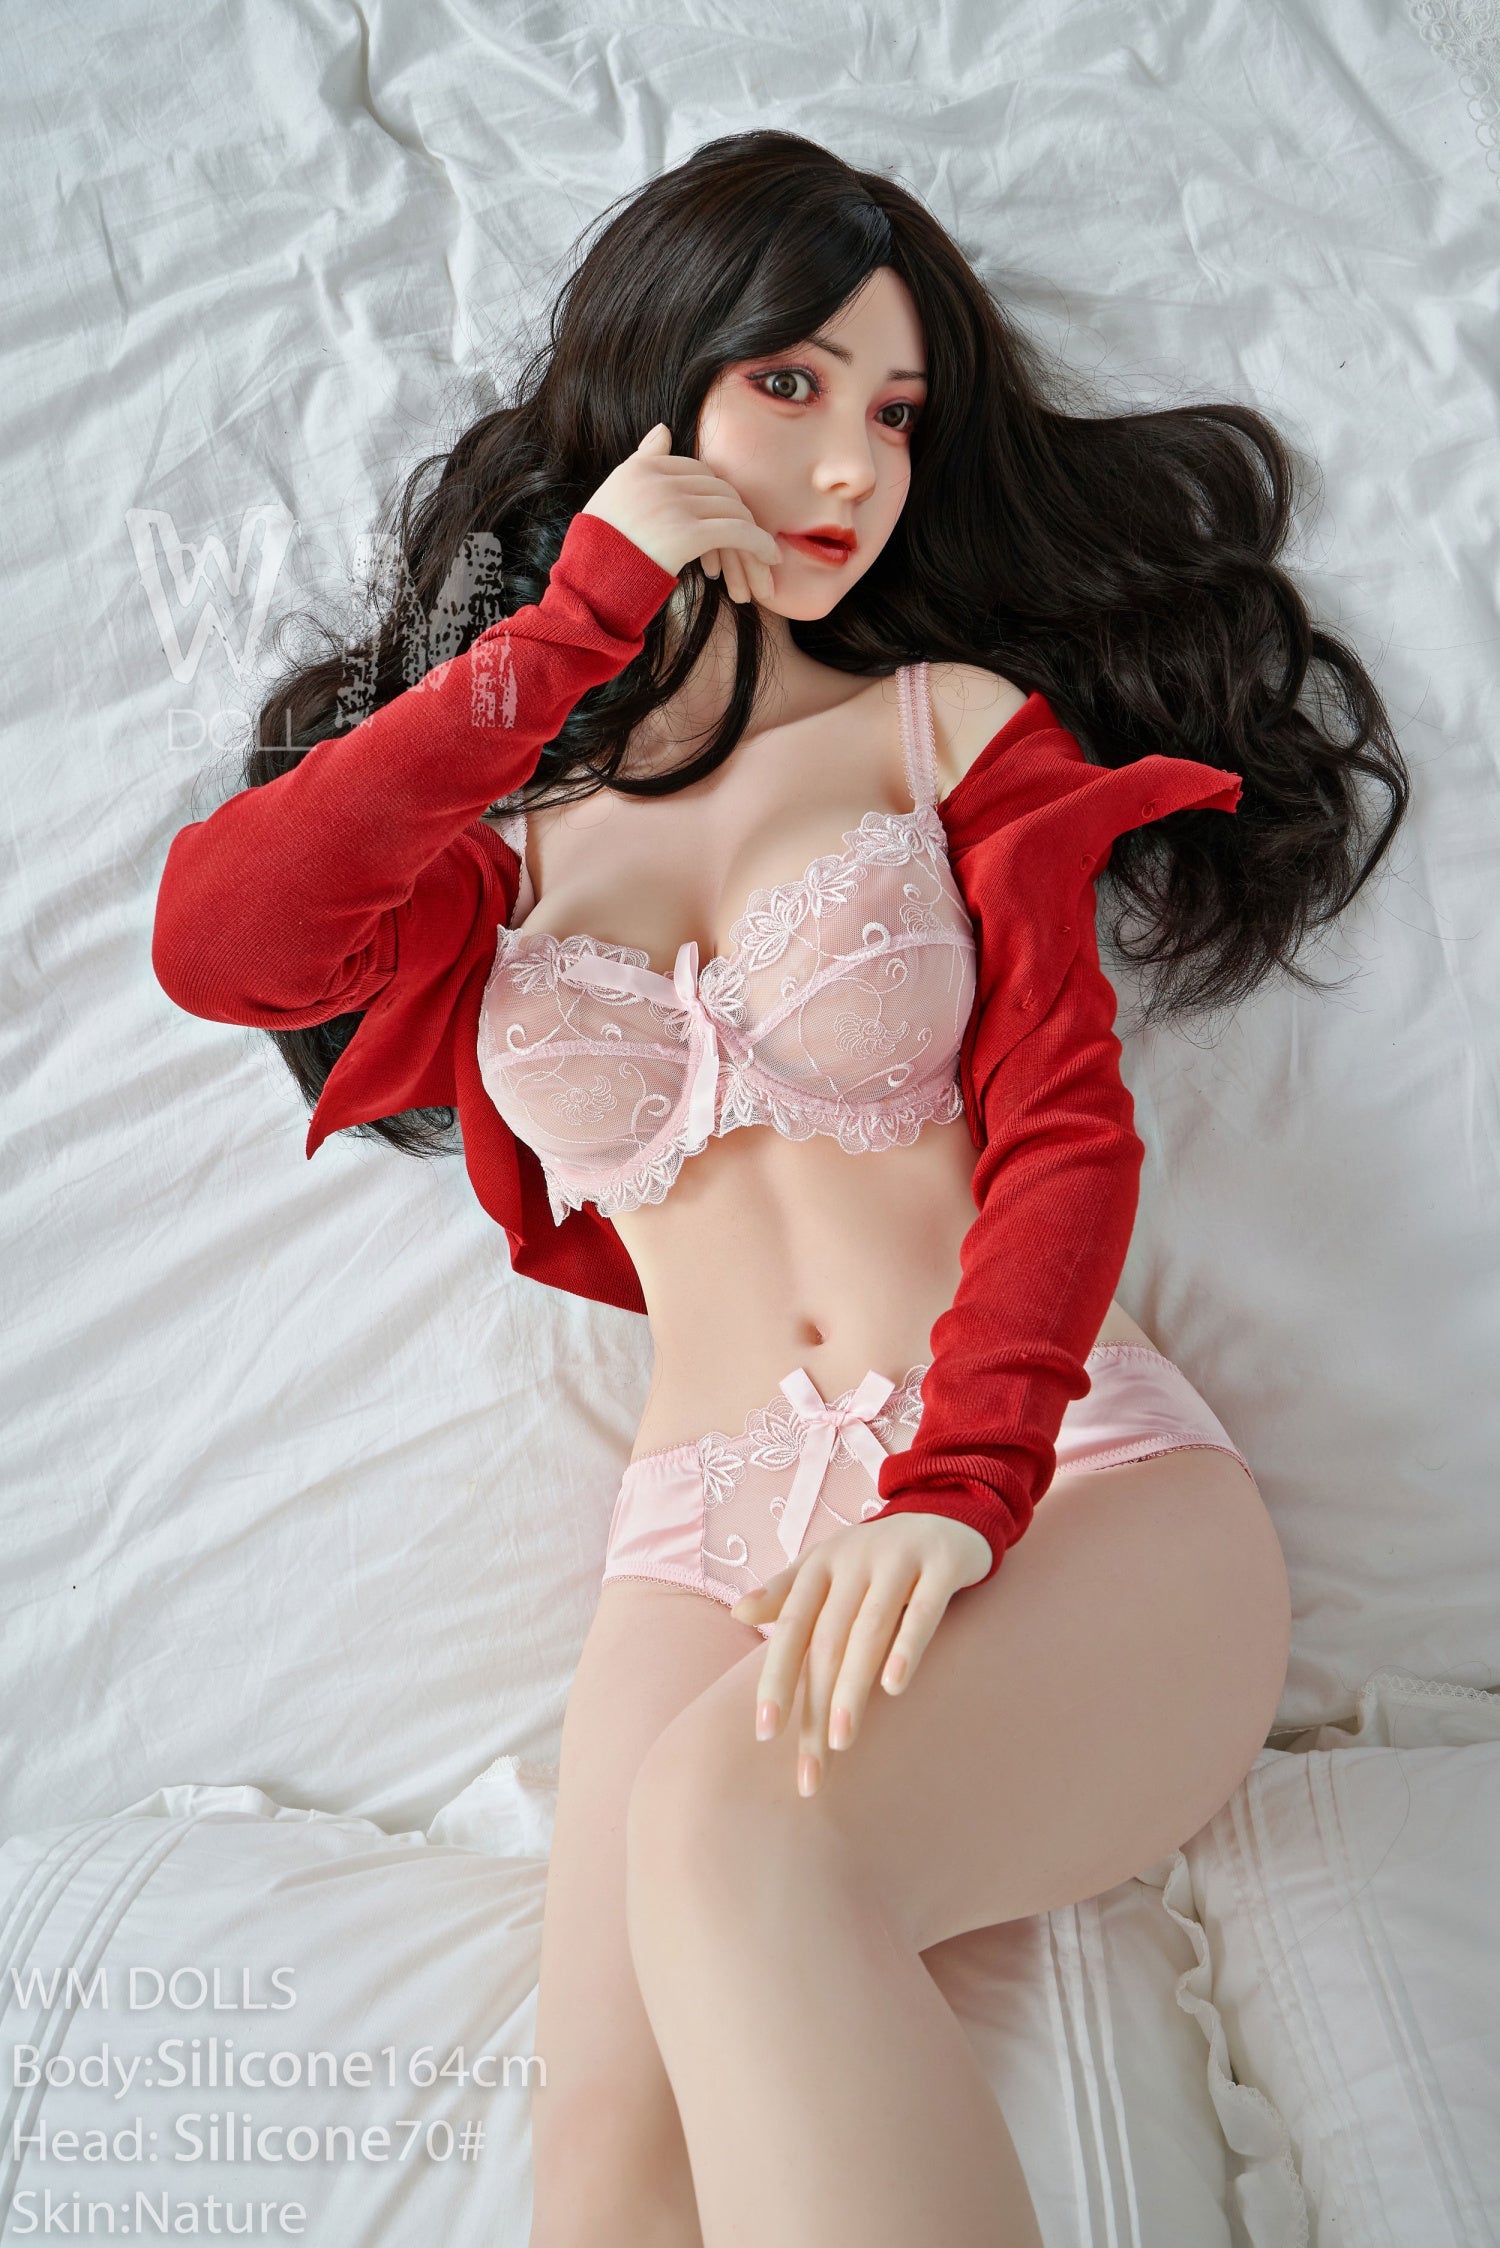 WM Doll 164 cm D Silicone - Margaret | Buy Sex Dolls at DOLLS ACTUALLY